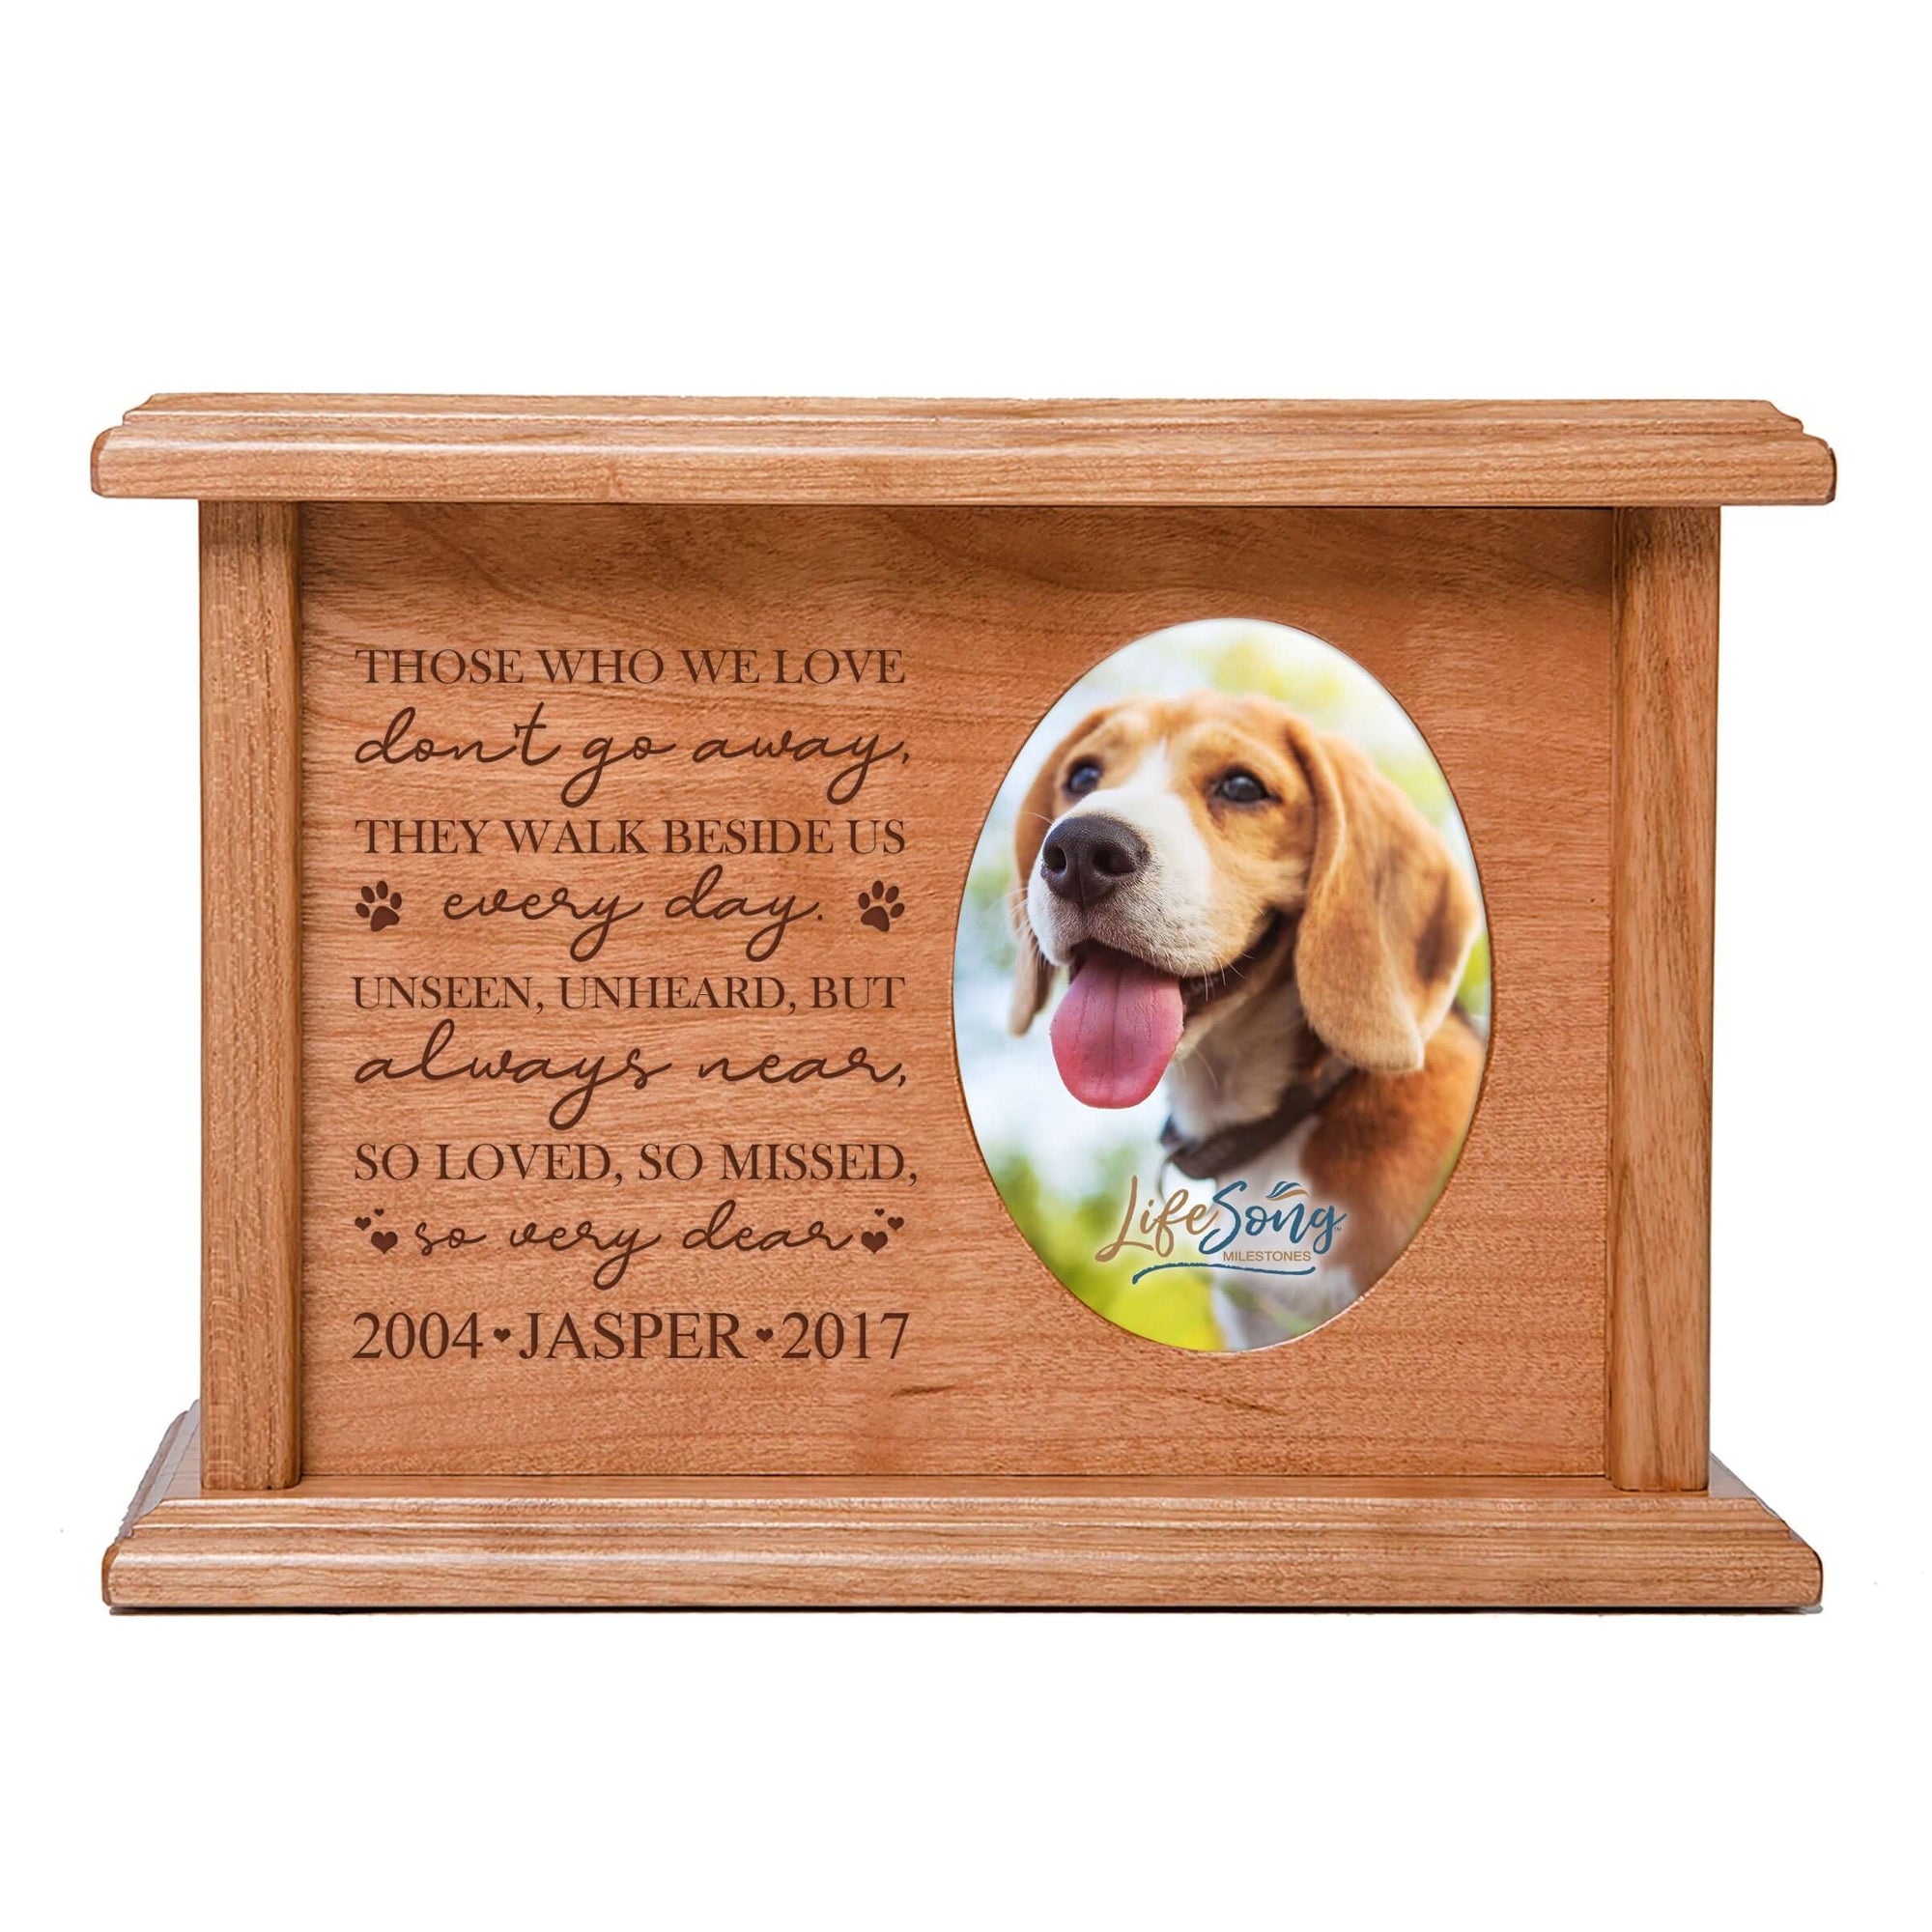 Pet Memorial Picture Cremation Urn Box for Dog or Cat - Those Who We Love Don't Go Away